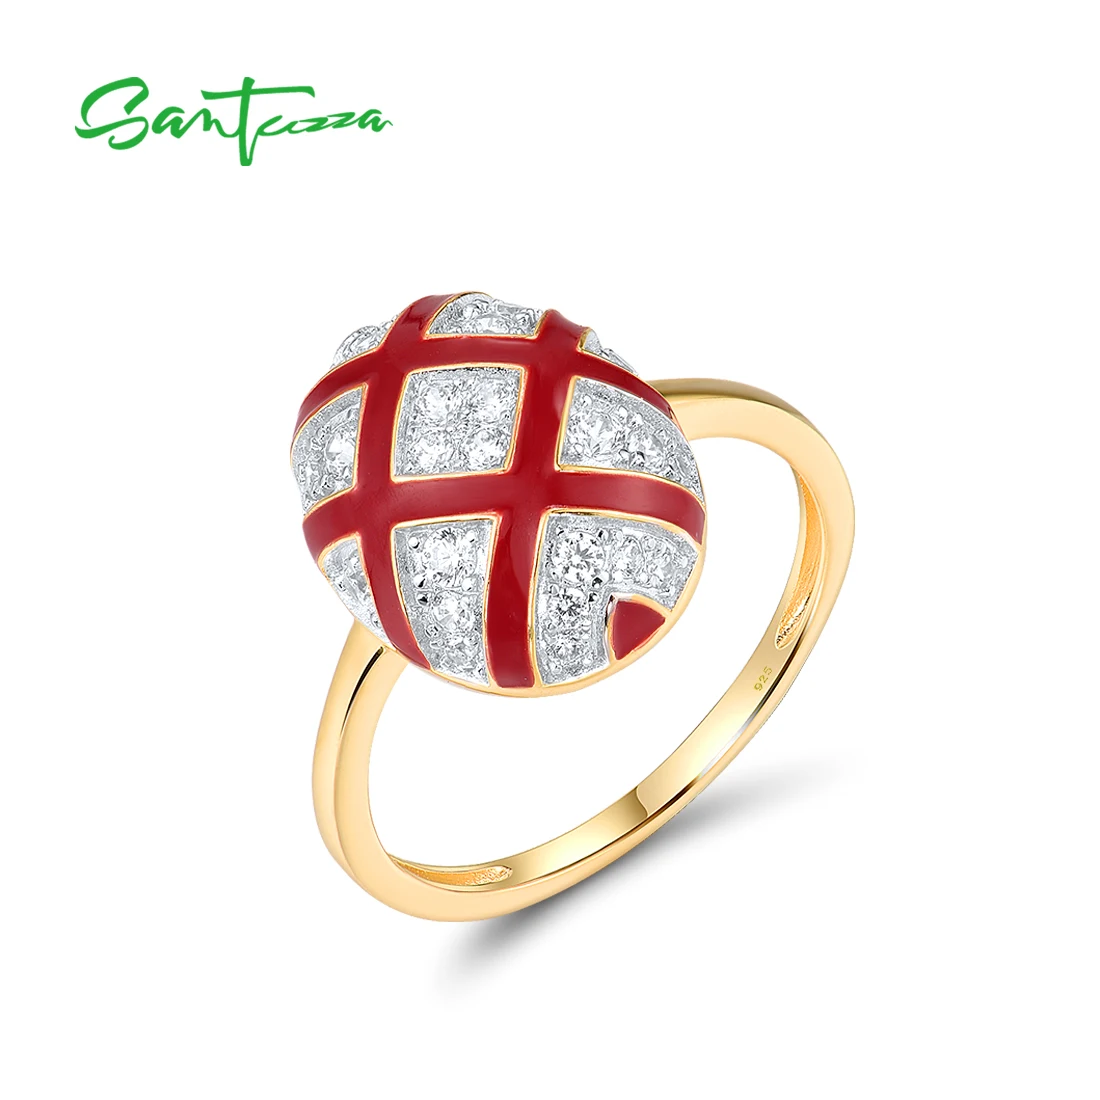 SANTUZZA Pure 925 Sterling Silver Rings For Women Sparkling White CZ Red Oval Cross Enamel Wedding Engagement Fine Jewelry Set